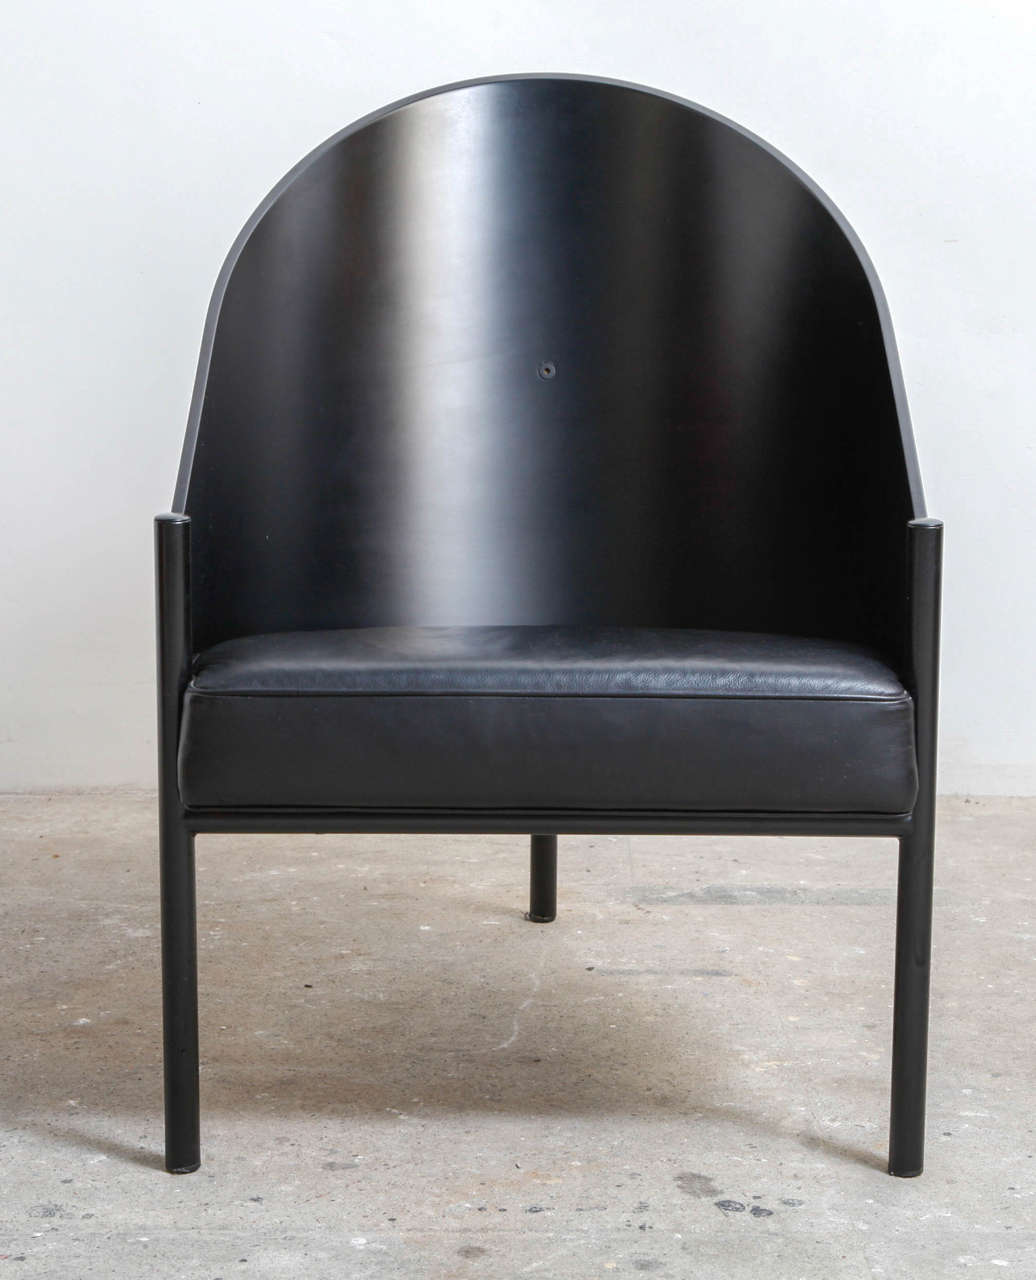 Philippe Starck easy chair has only three legs!
Black lacquered steel frame with a bent ply-wood back body,black lacquered,leather cushion,made in Italy.
Philippe Starck was born in Paris in 1949. He won the La Vilette furniture competition in